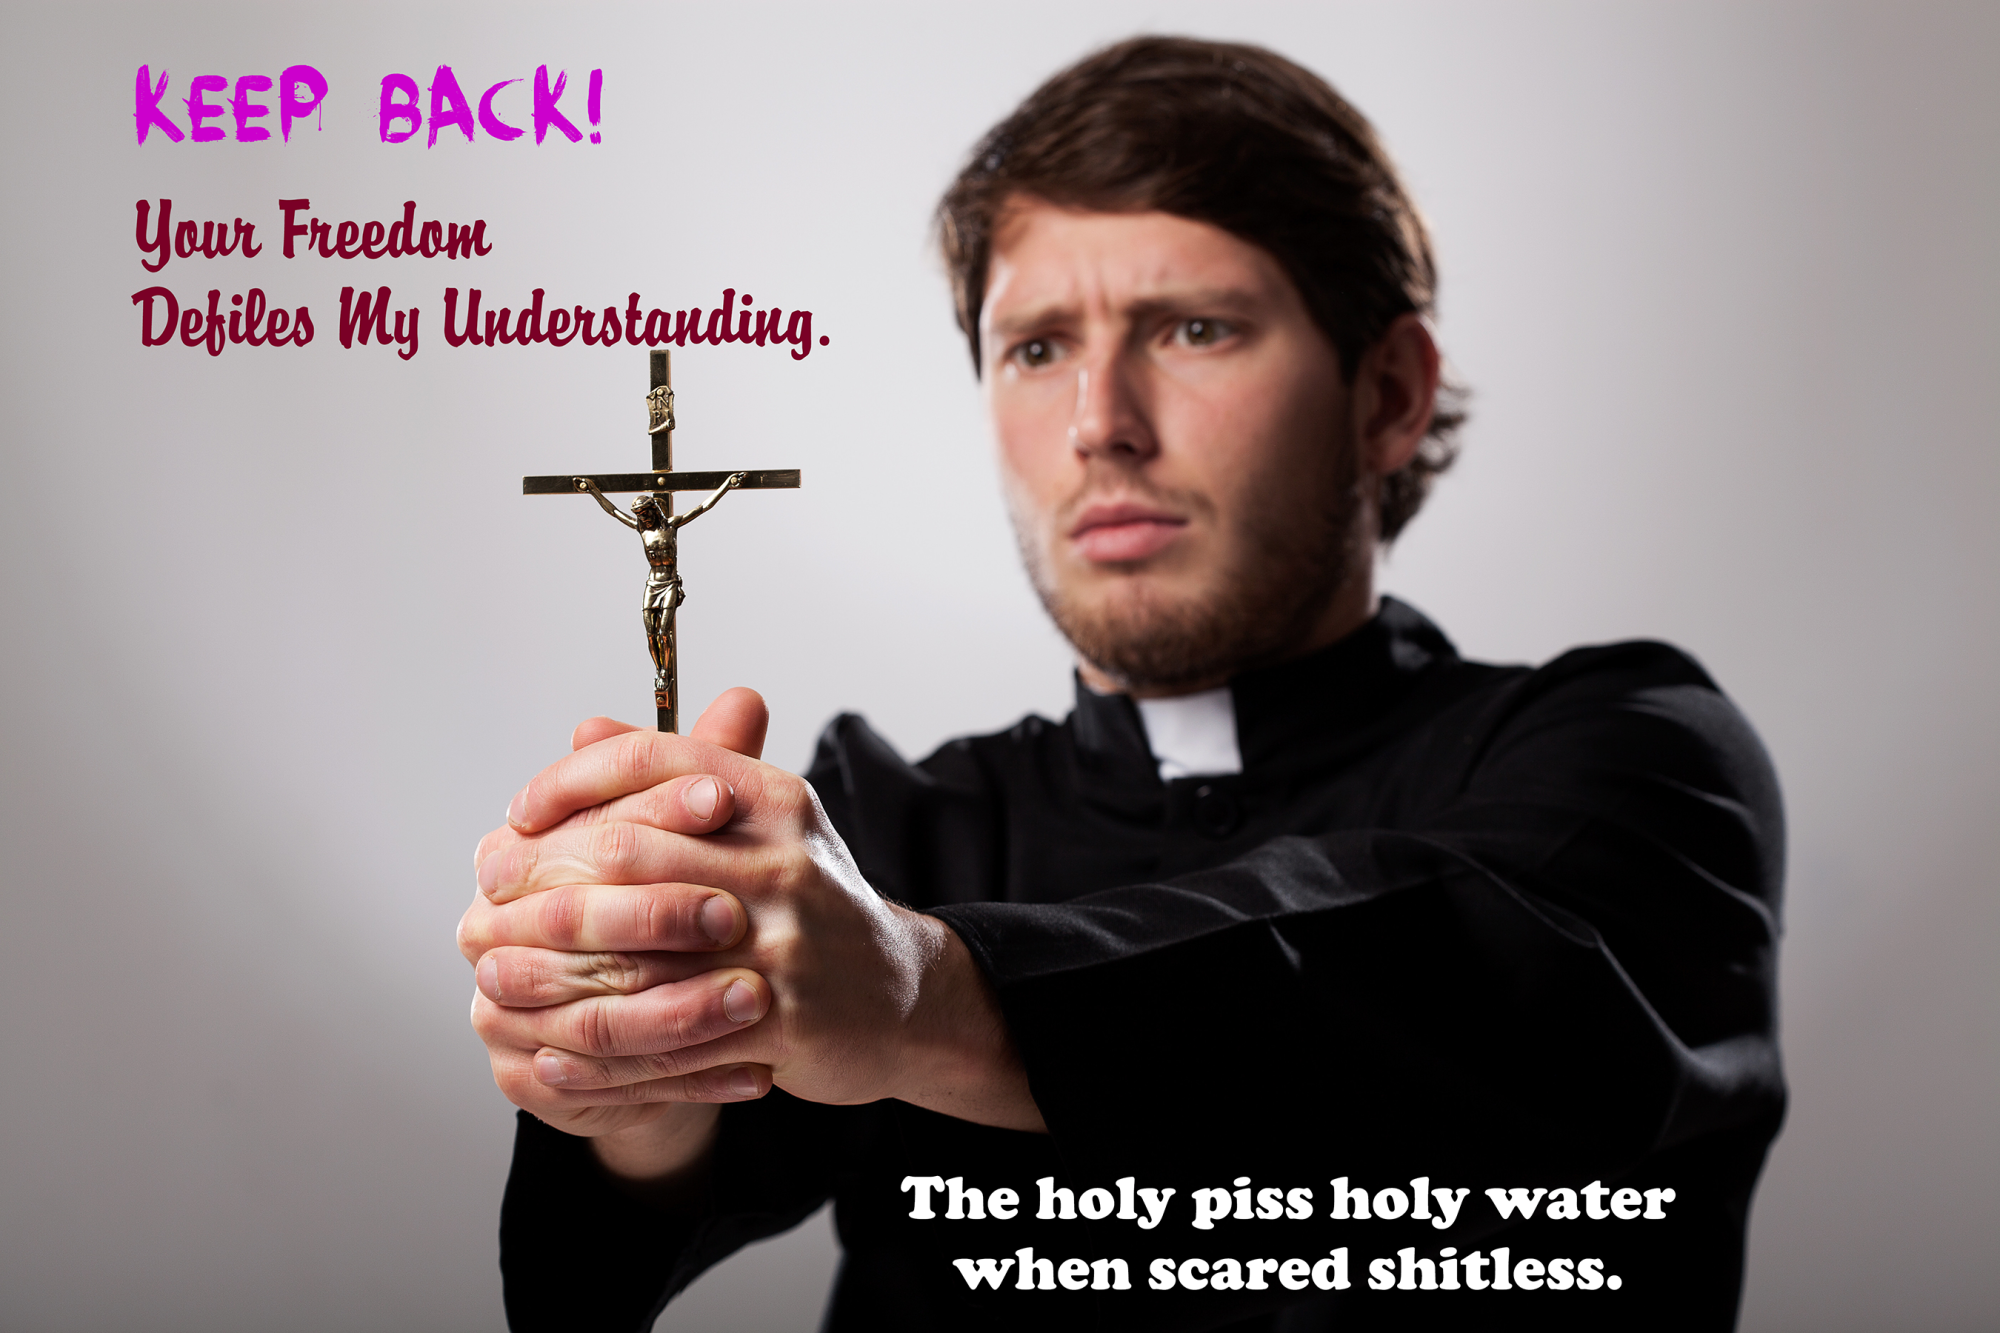 Piss in the holy water